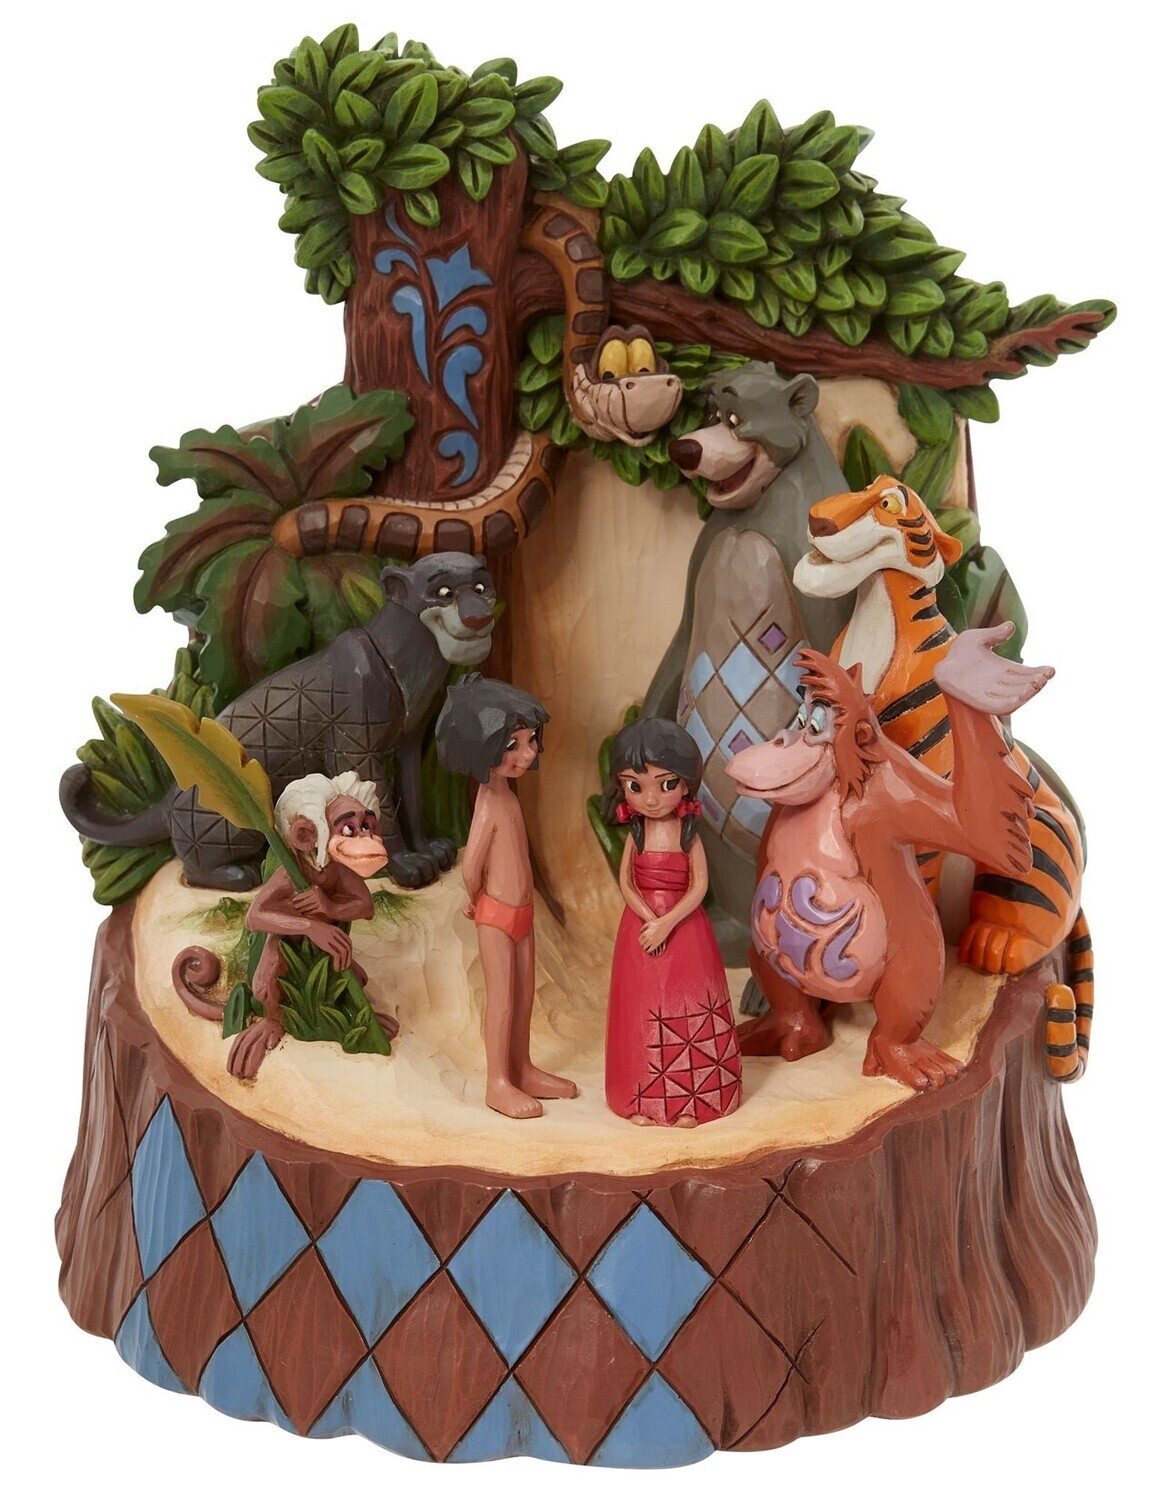 Jim Shore Disney Traditions "Jungle Book Carved by Heart" (6010085)